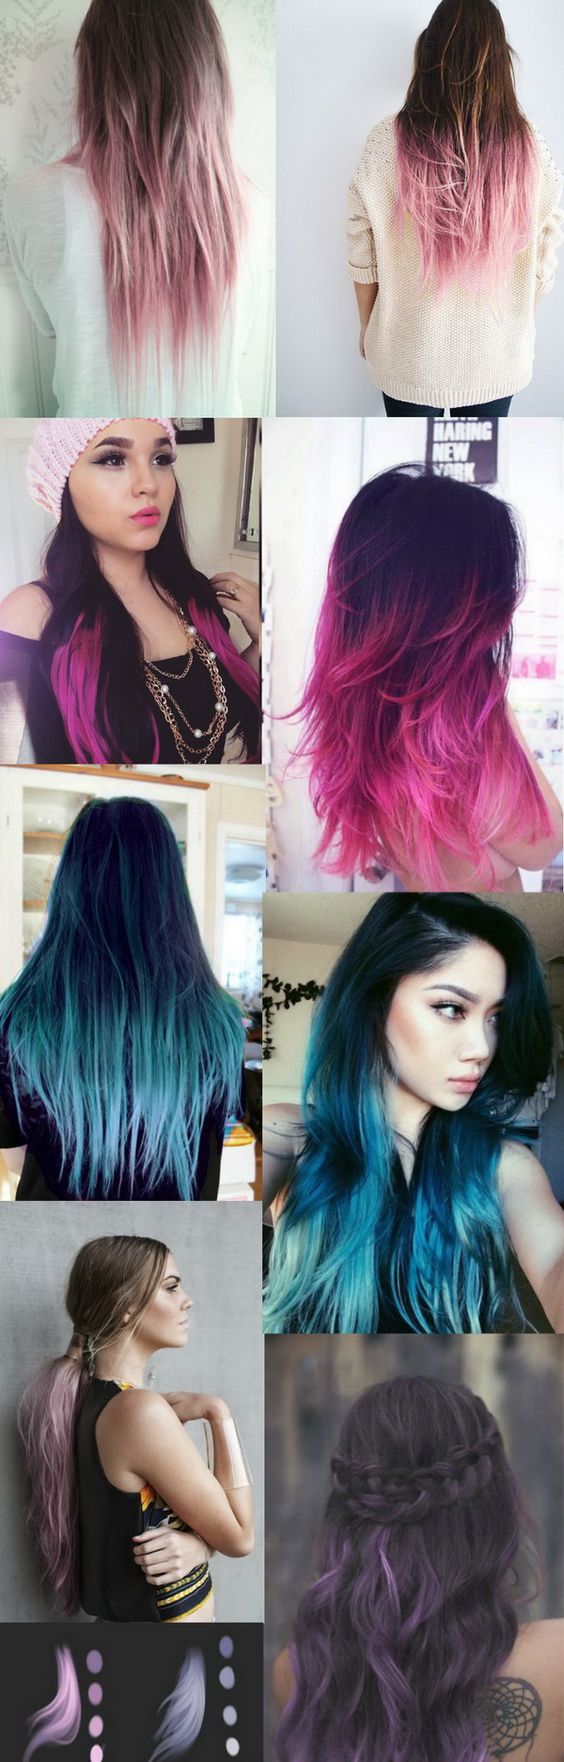 Pastel-Ombre-Hairstyles.